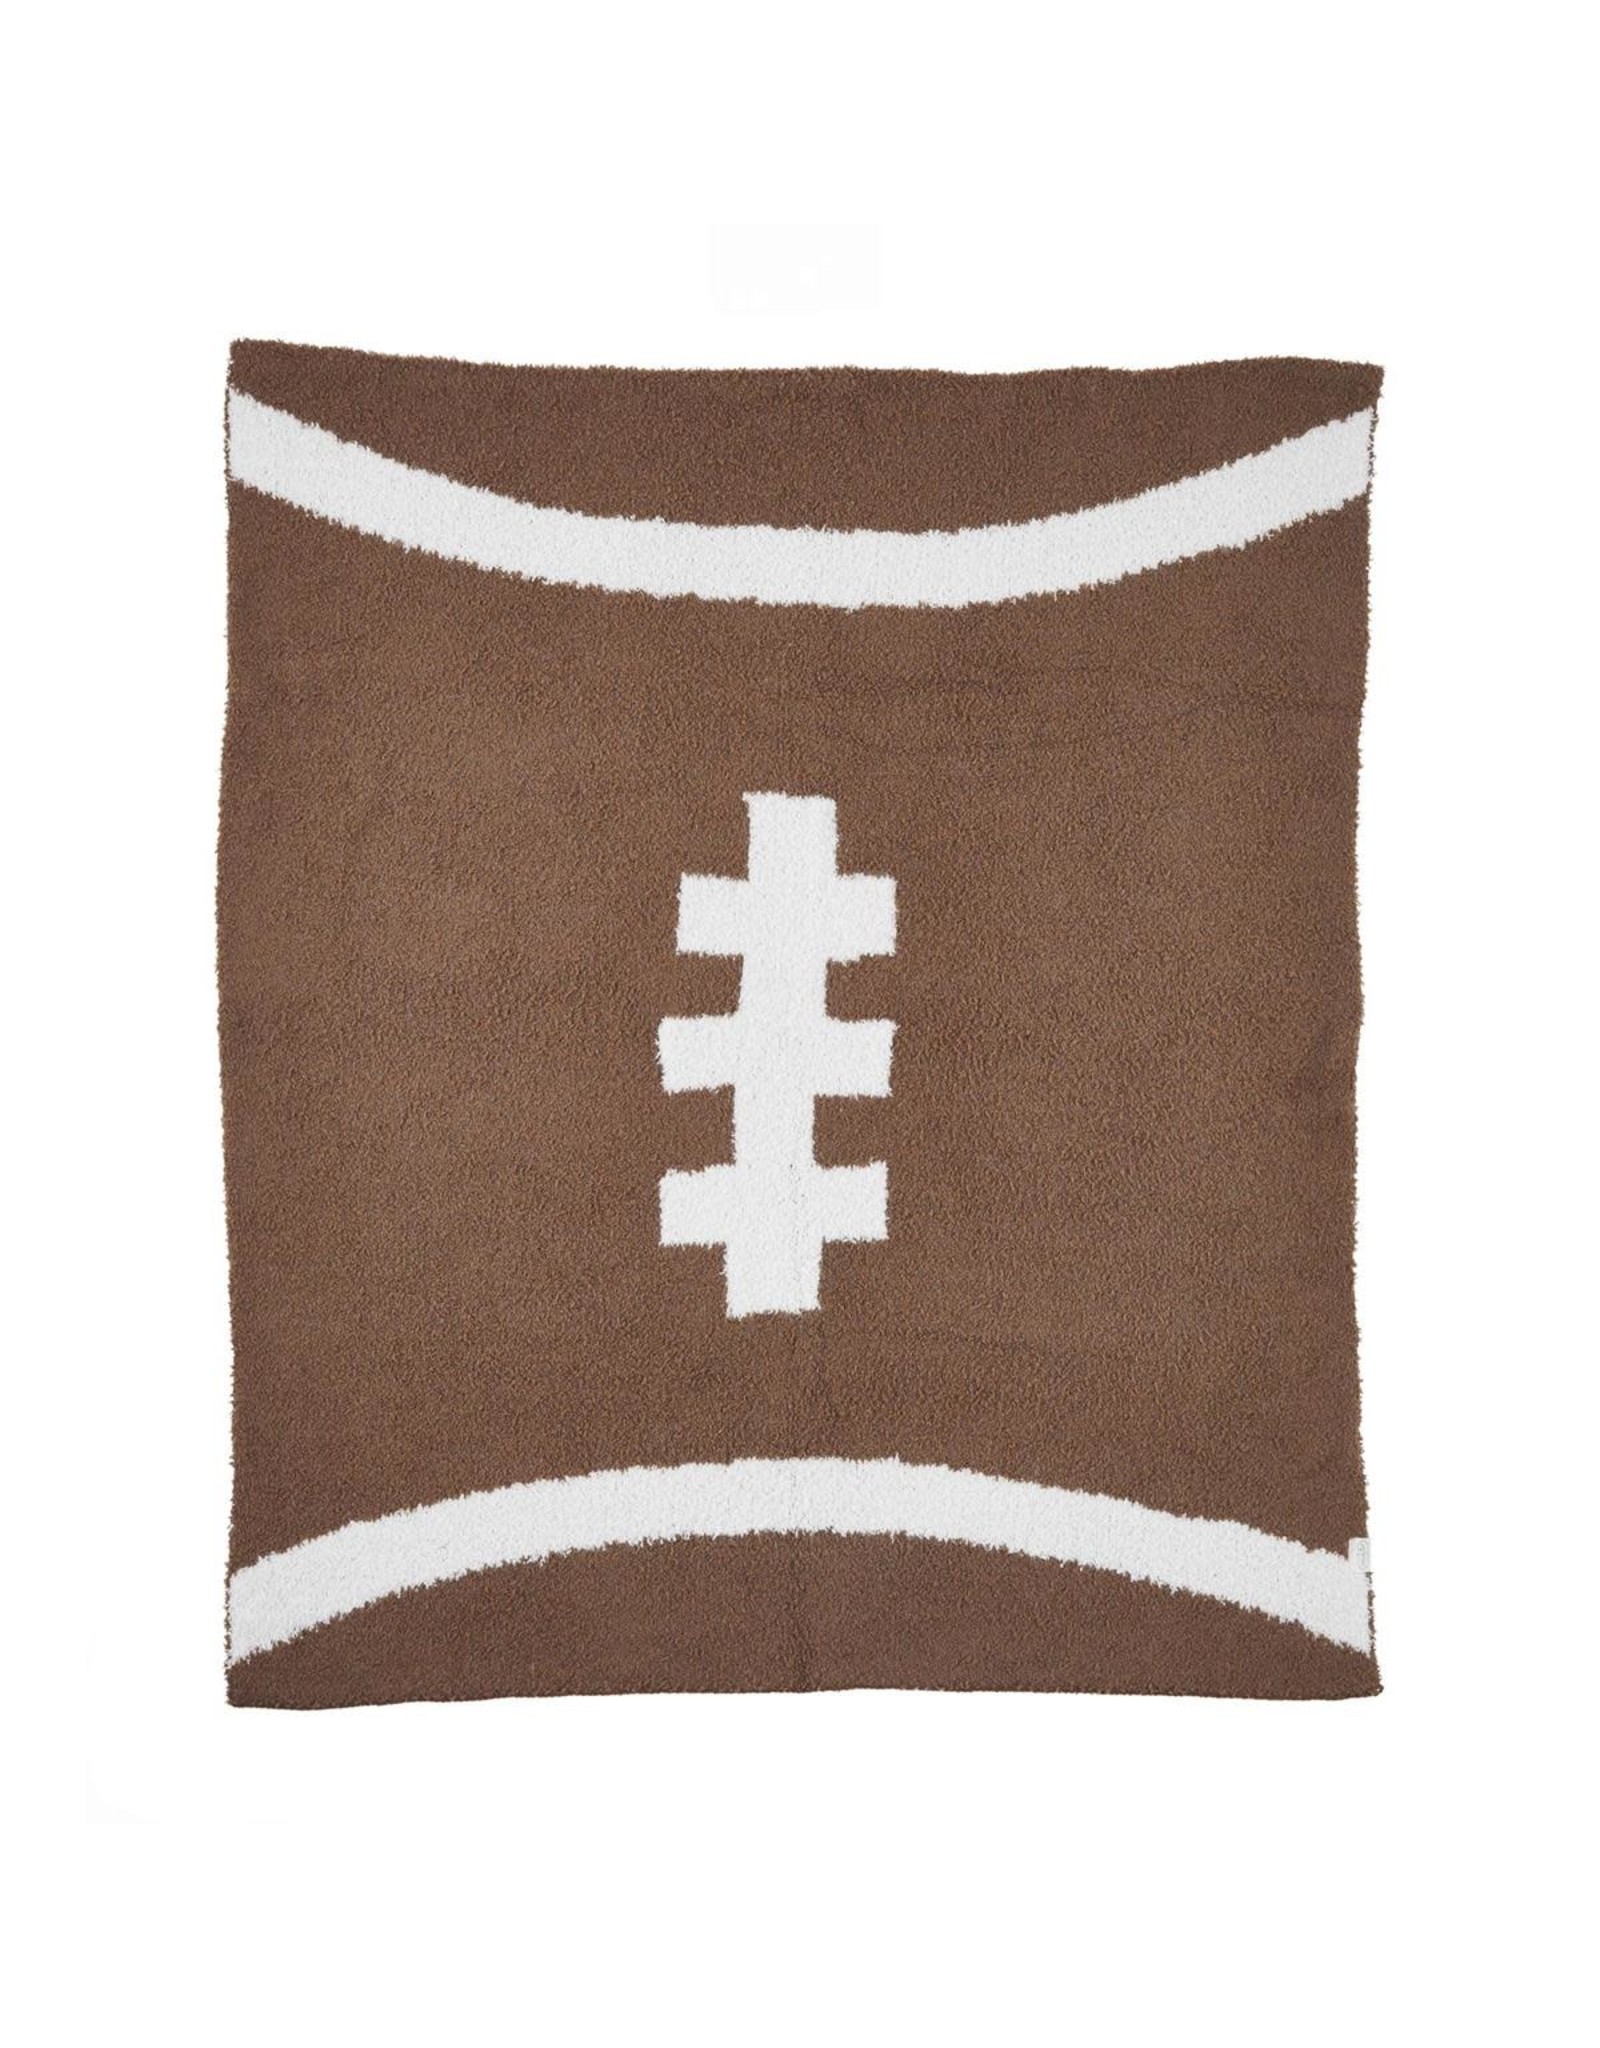 Mud Pie Chenille Football Blanket 36x28 Inches